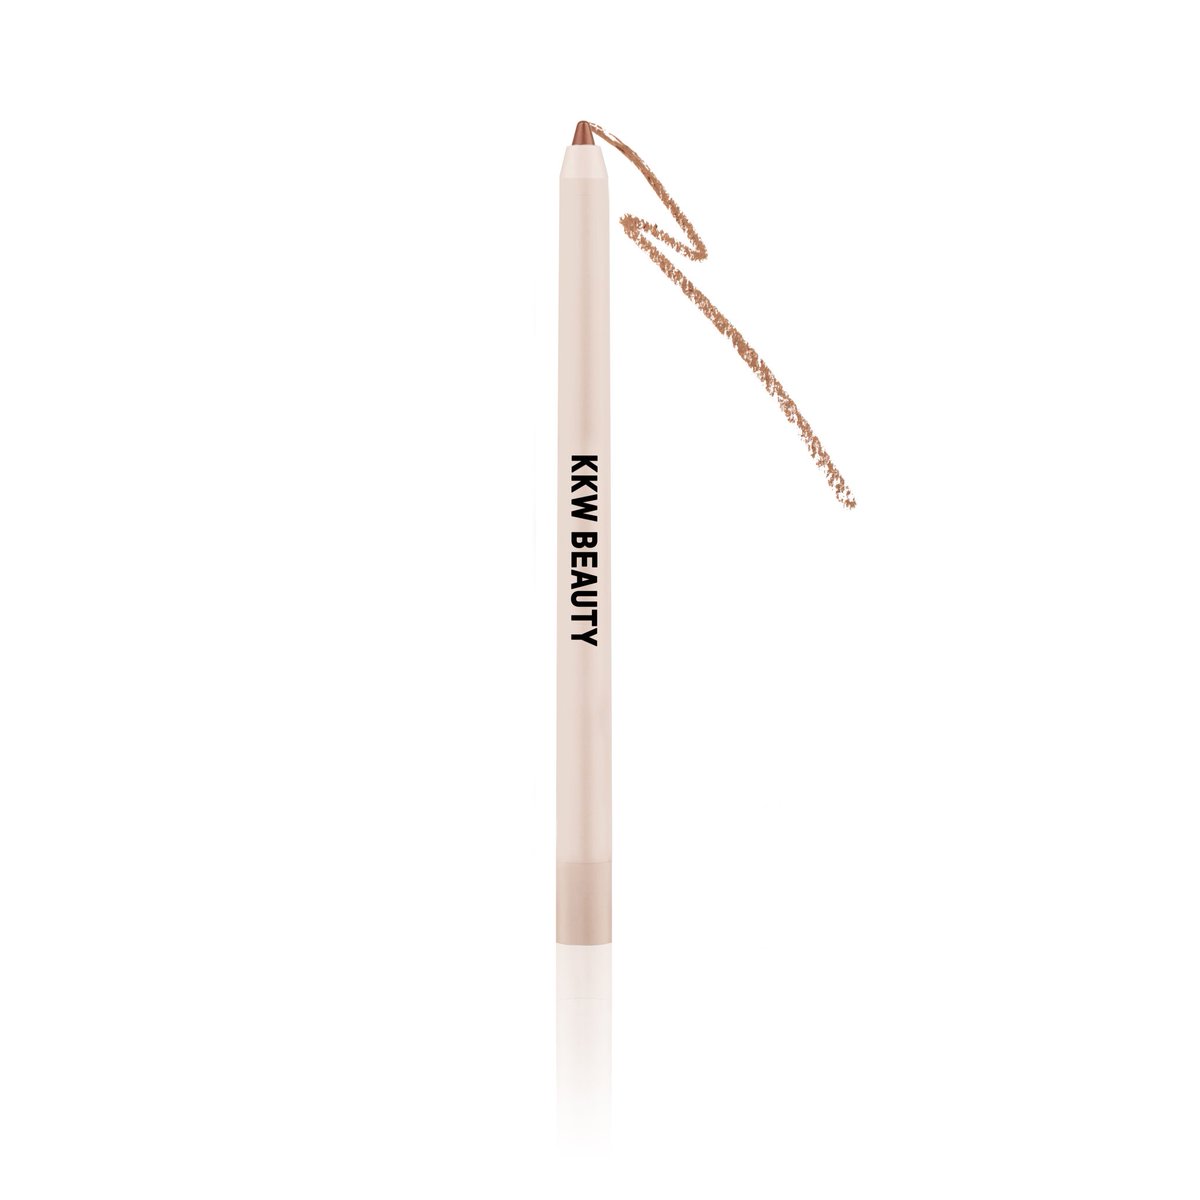 RT @kkwbeauty: Lip Liner in Nude 1 is SOLD OUT! Shop Lip Liners in Nude 2 & 3 here: https://t.co/AY5tkfTH2H https://t.co/r61OtYJucM